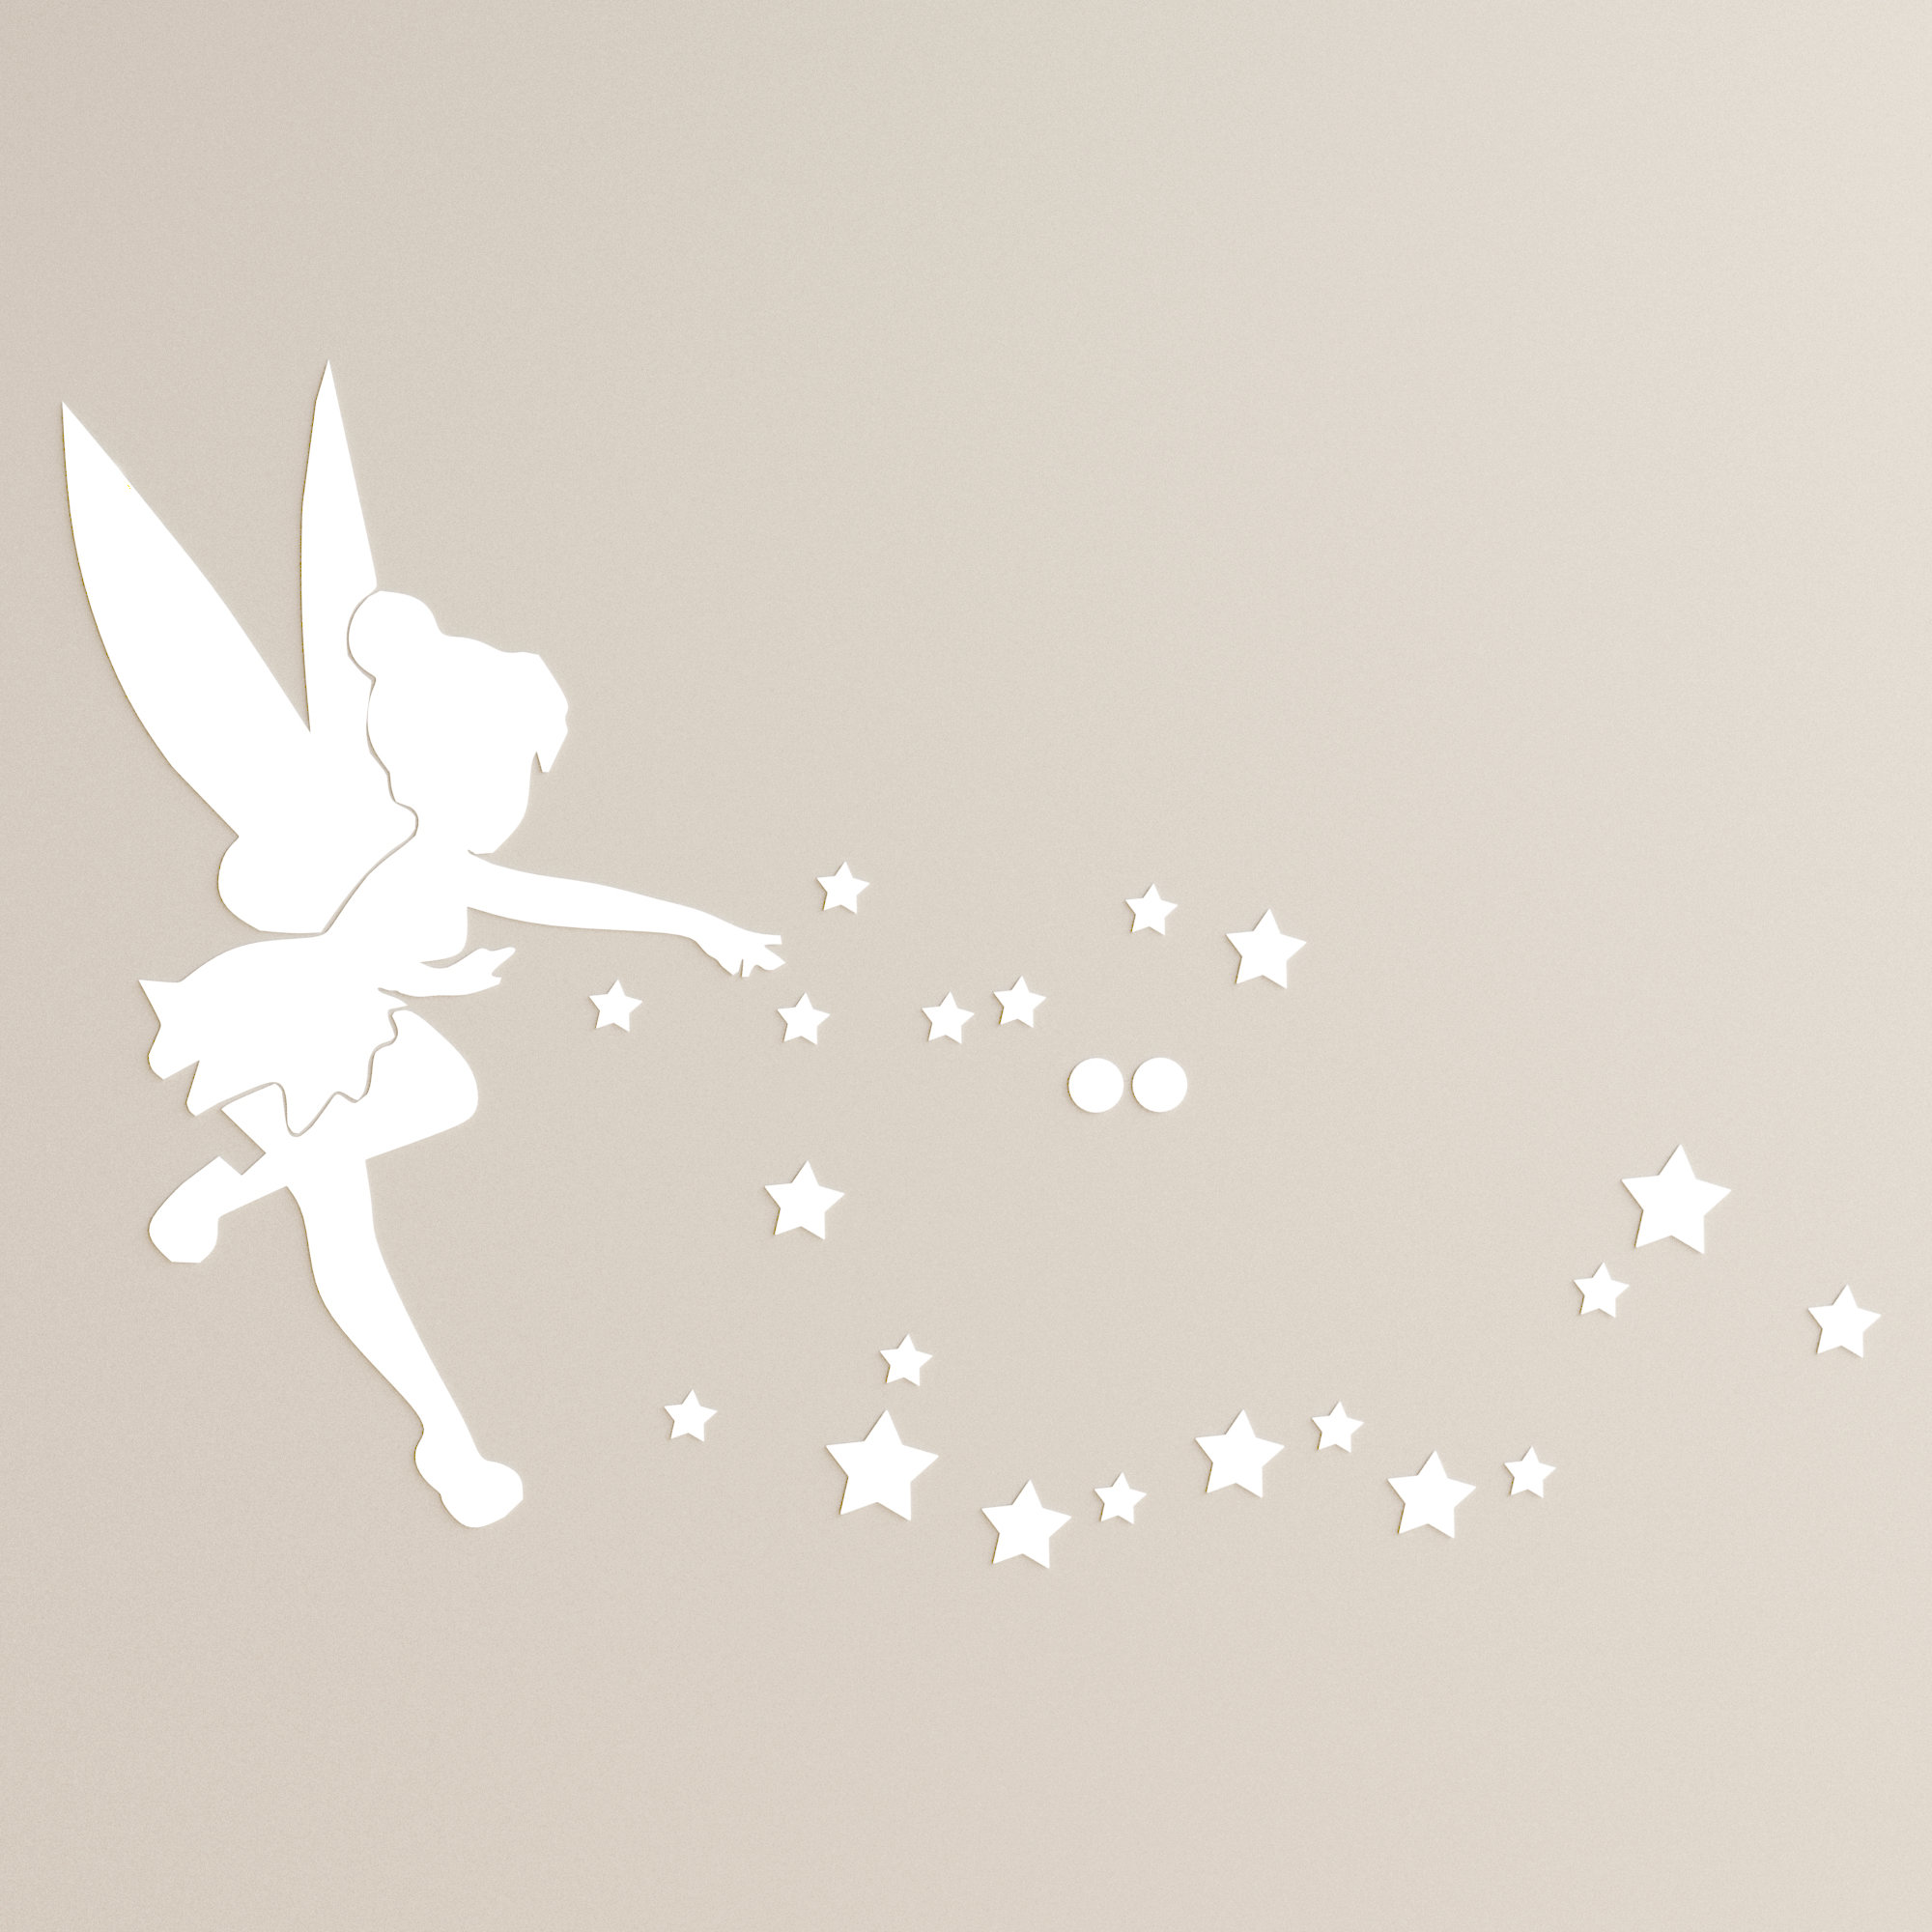 Fairy dust and cuddles wall stickerFairy princess themeStickerscape 